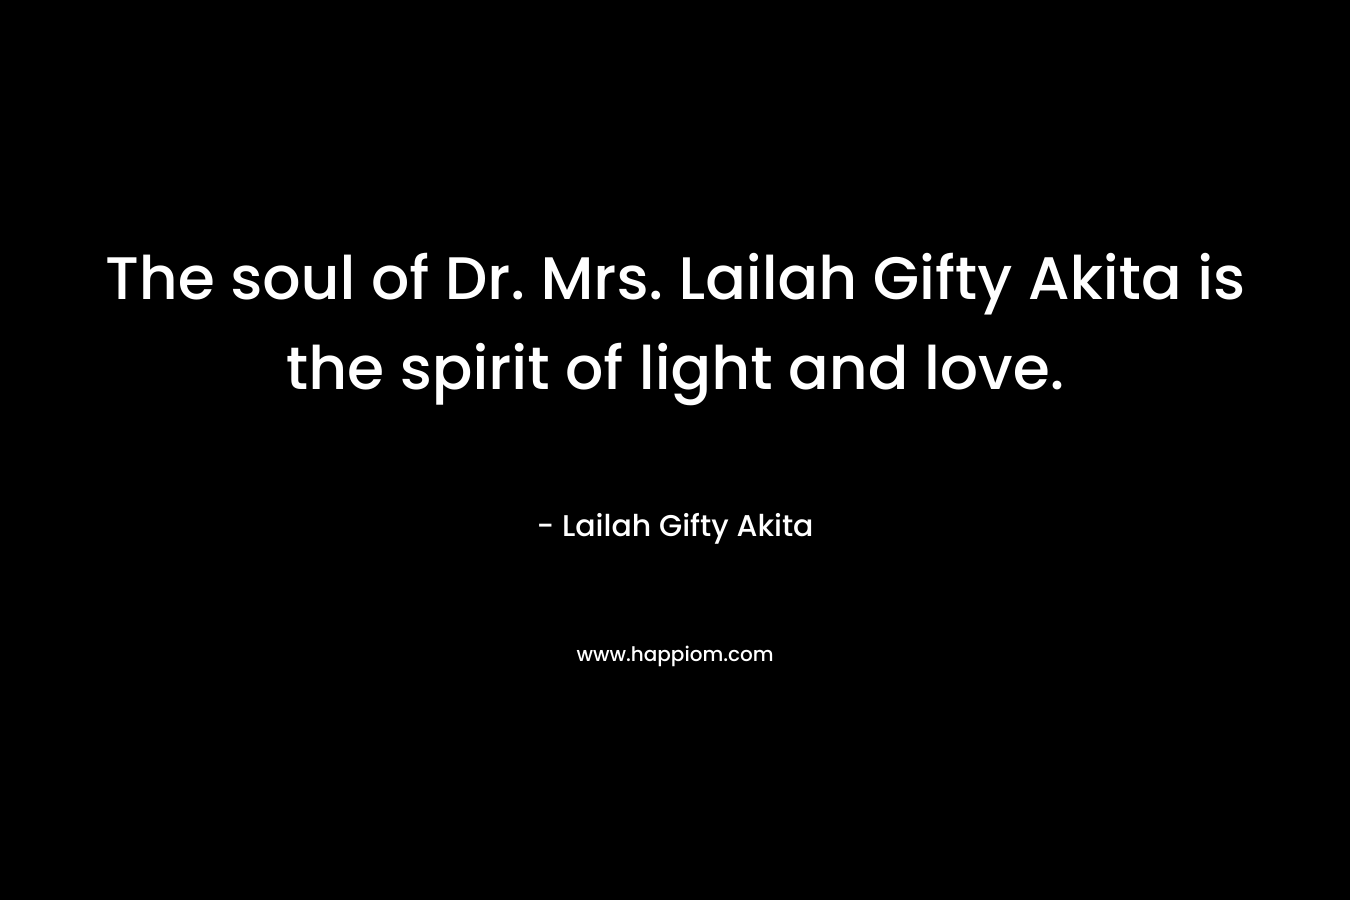 The soul of Dr. Mrs. Lailah Gifty Akita is the spirit of light and love. – Lailah Gifty Akita